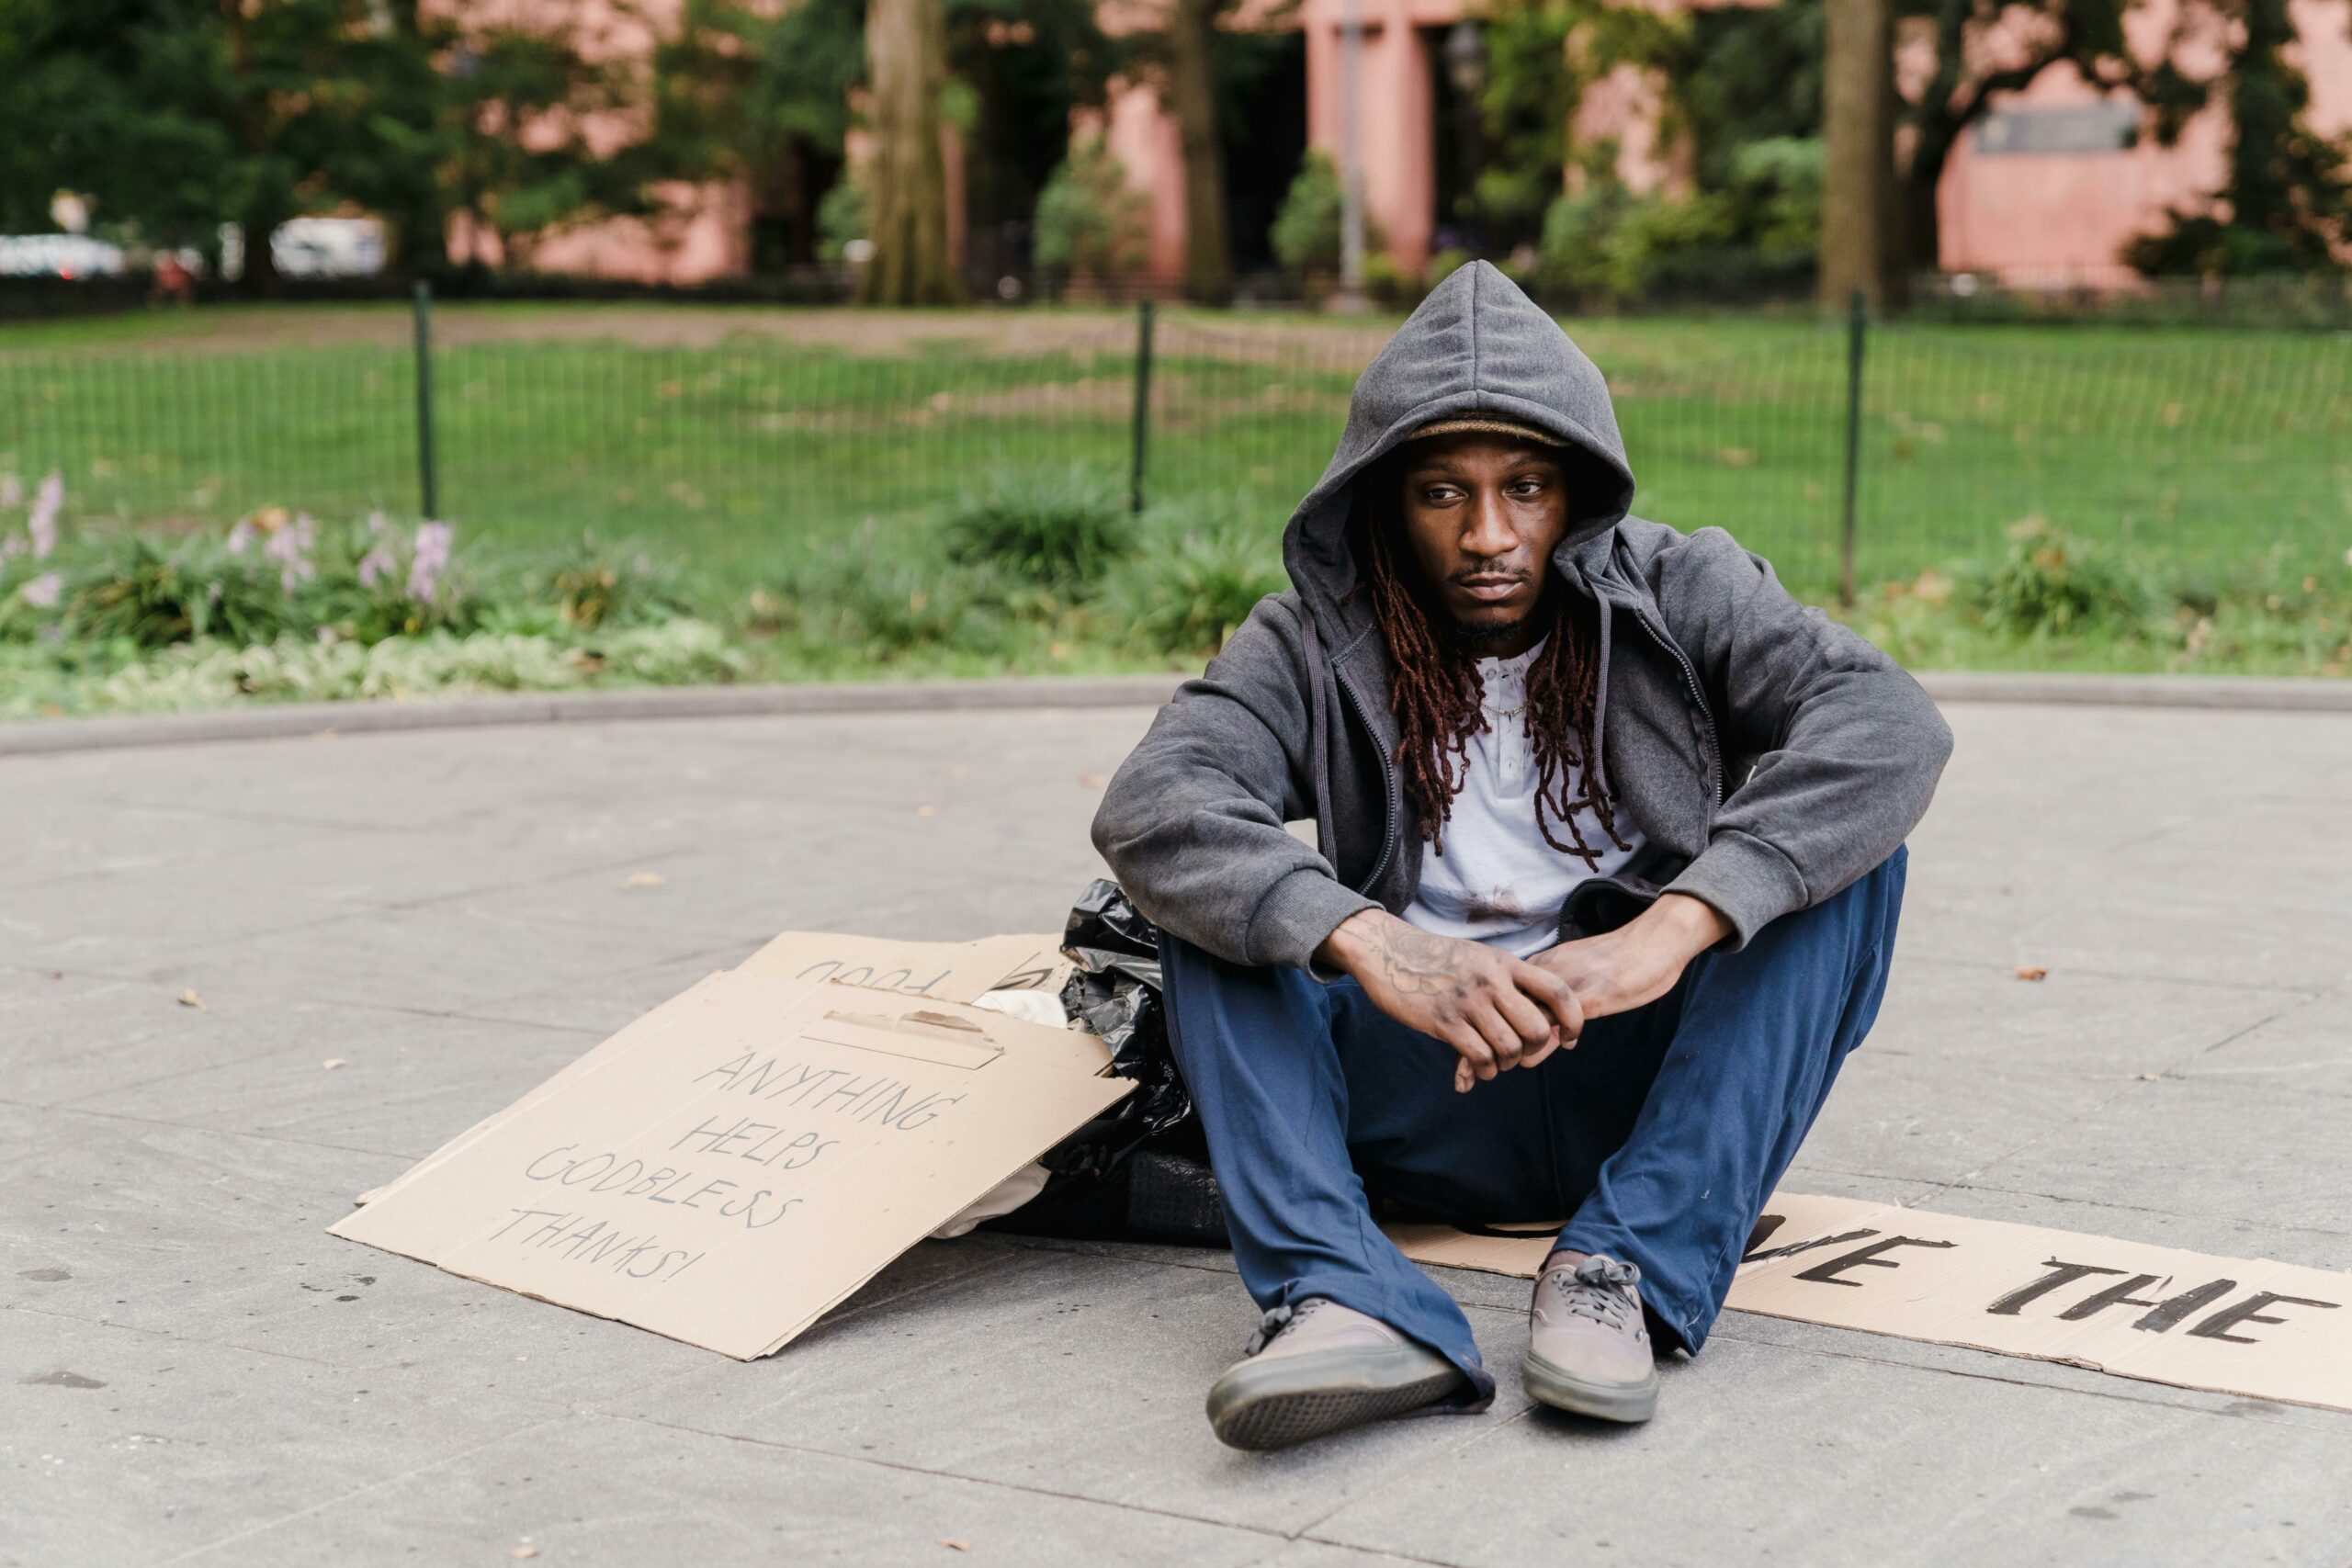 A person sitting on the ground in a park with a sign asking for help, representing the struggle with homelessness.